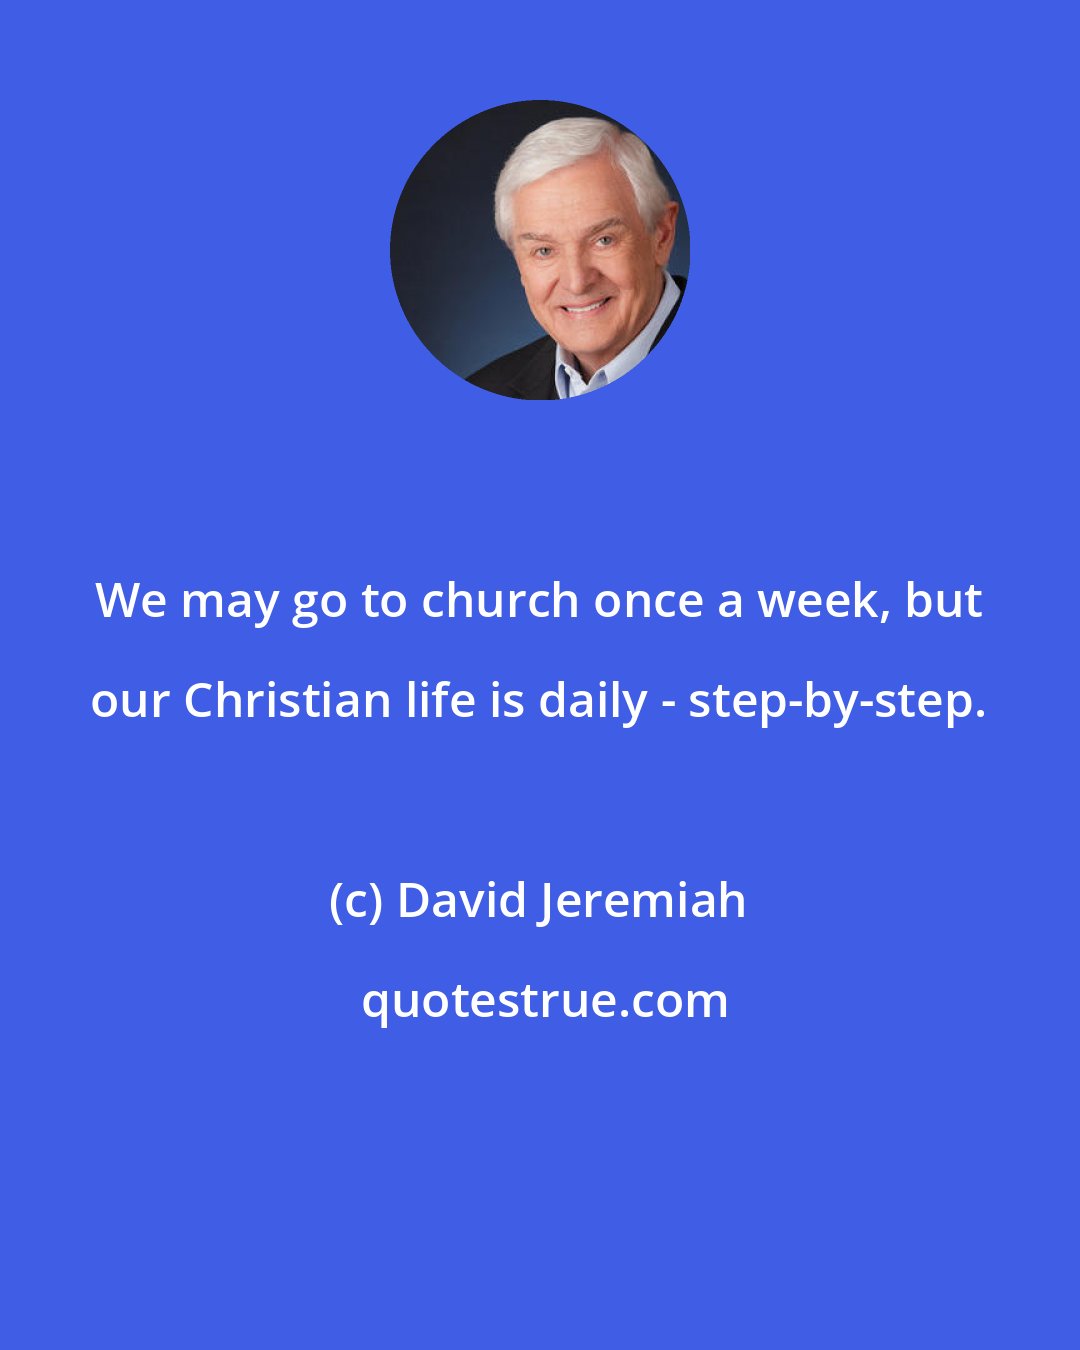 David Jeremiah: We may go to church once a week, but our Christian life is daily - step-by-step.